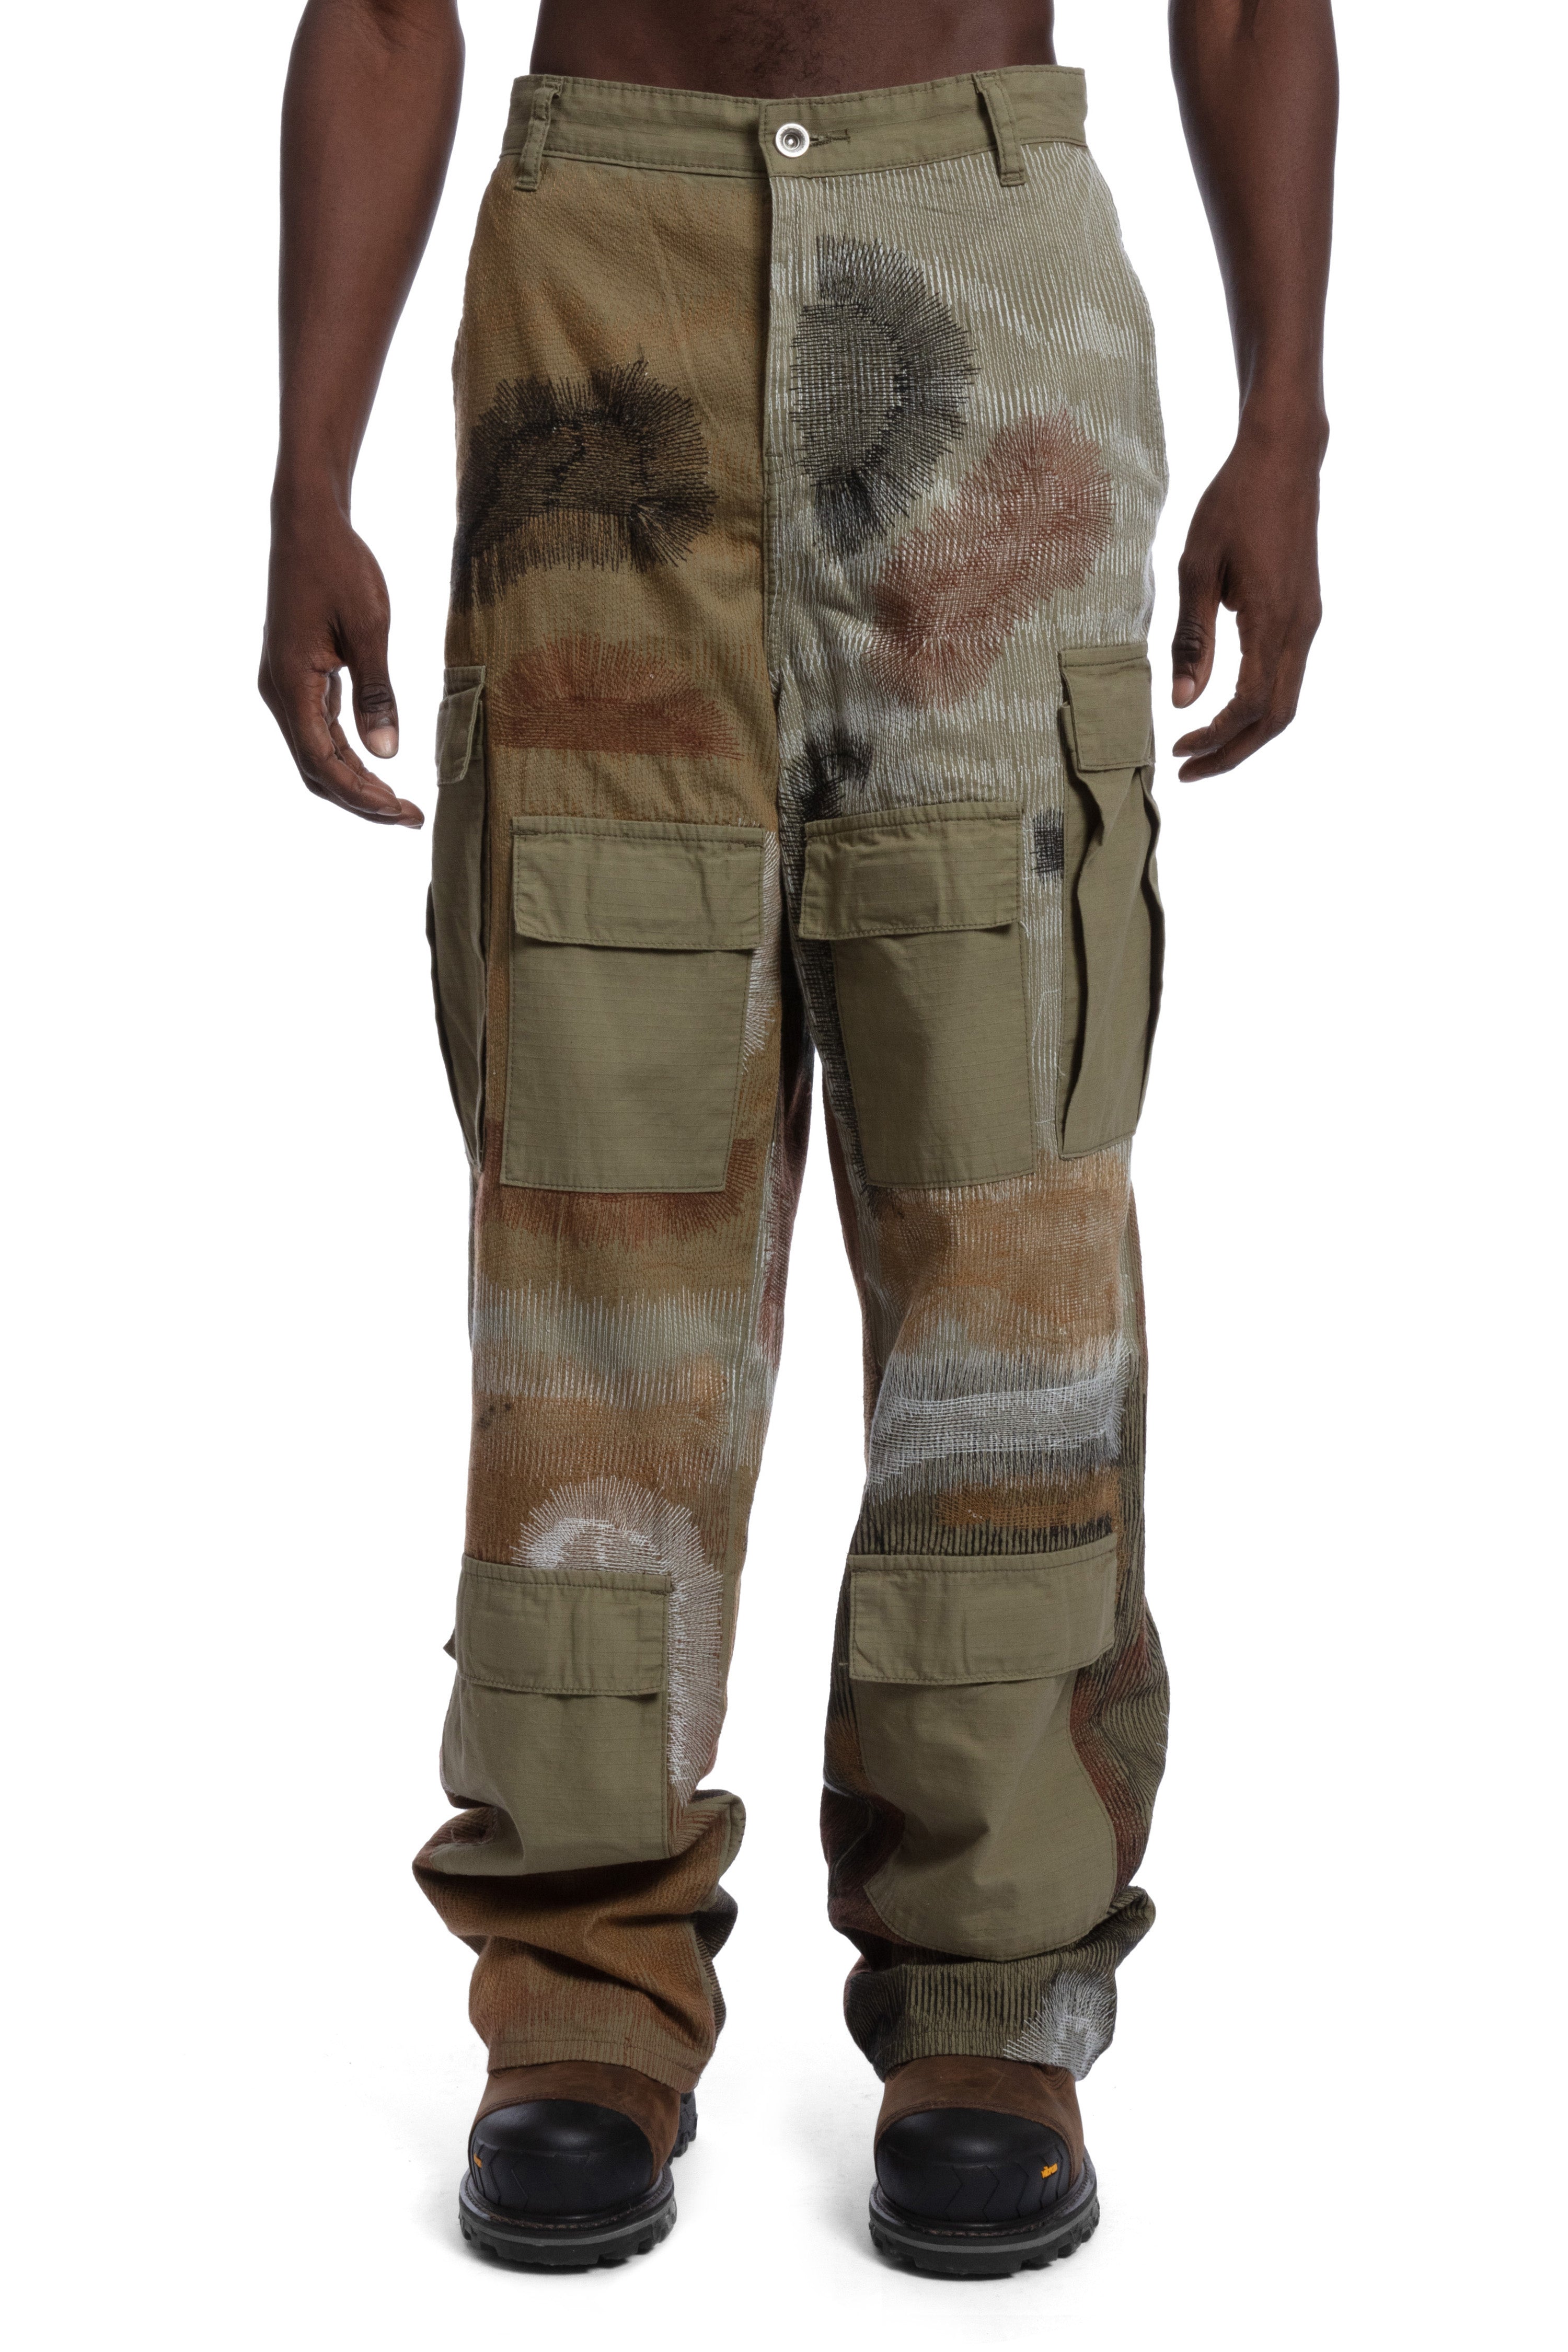 CAMOUFLAGE EMBROIDERY CARGO PANT – WHO DECIDES WAR